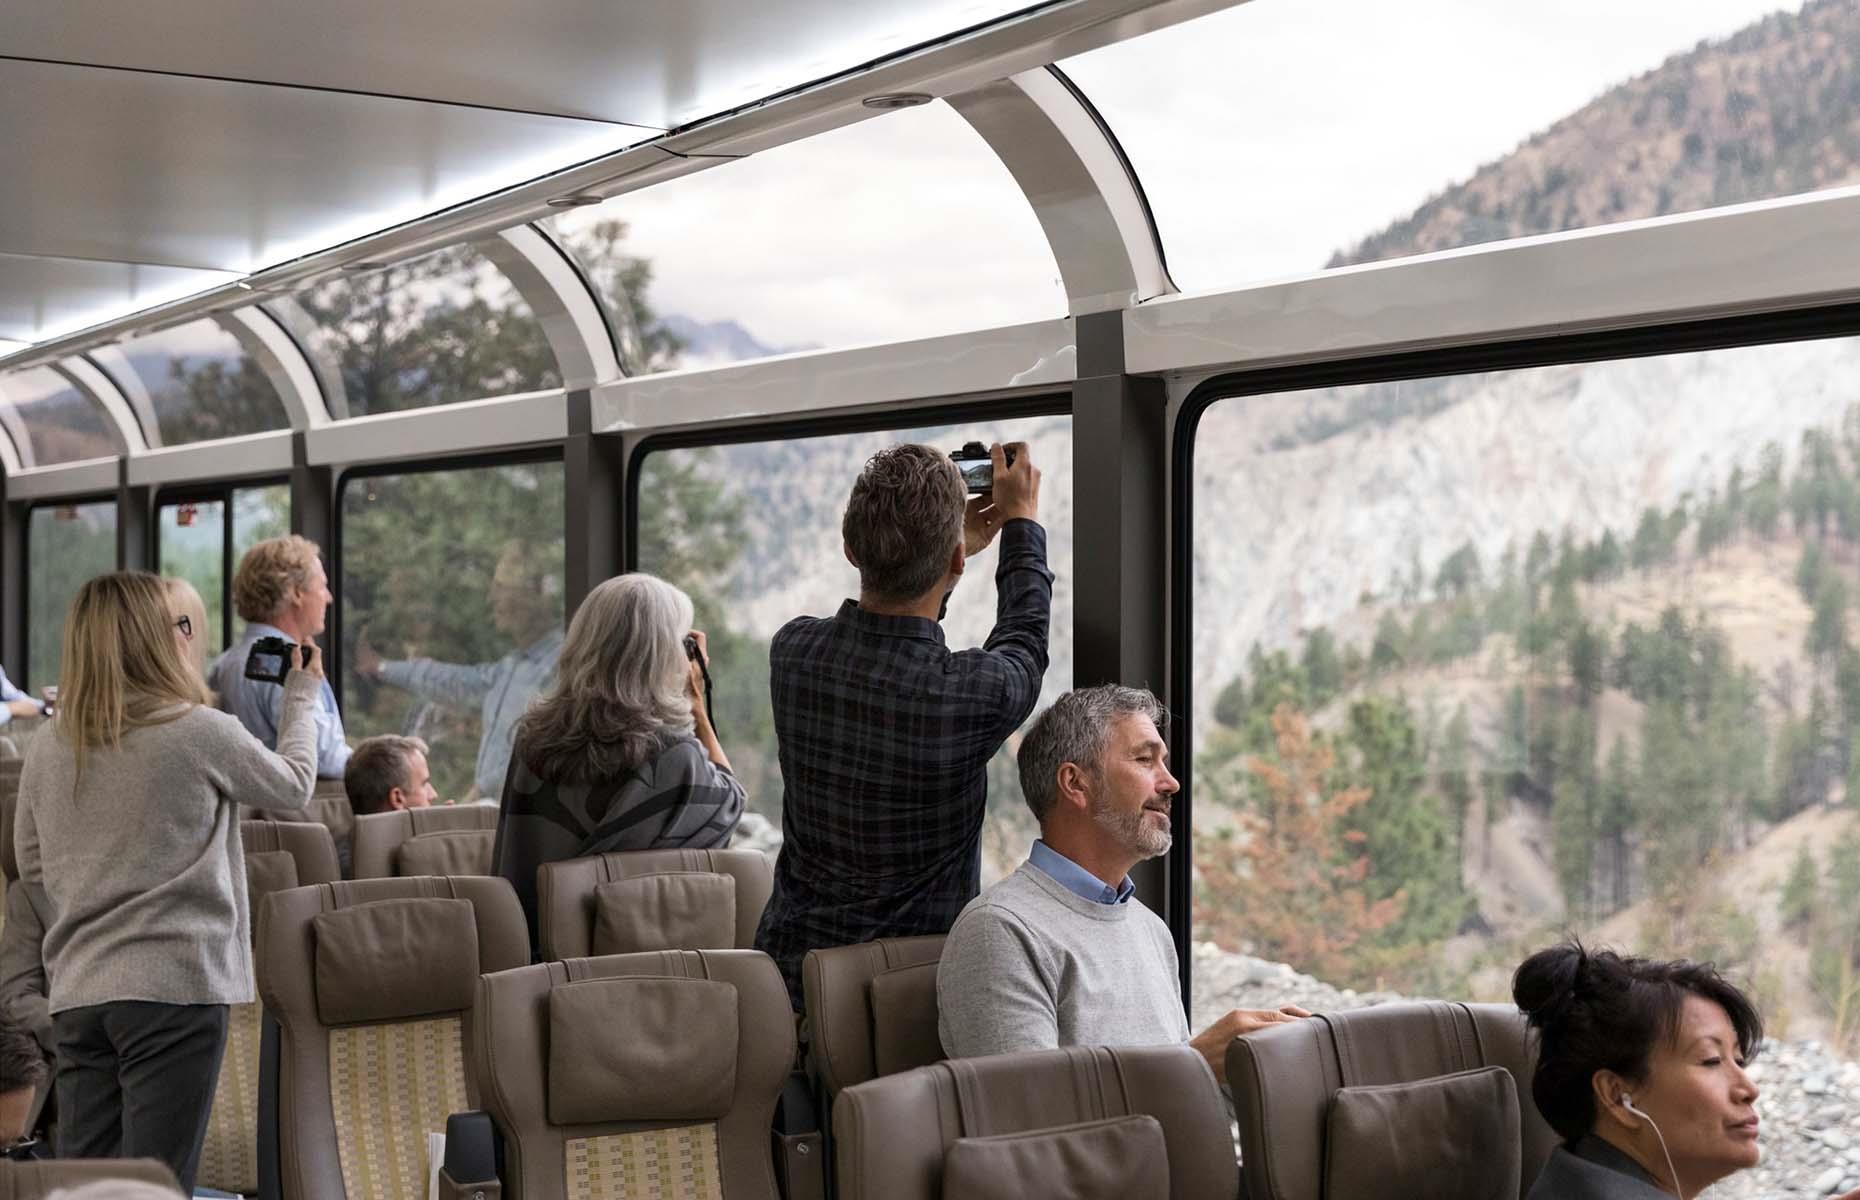 <p>A new Rocky Mountaineer route takes passengers on an exciting two-day journey between Denver, Colorado and Moab, Utah, with an overnight stay in Glenwood Springs, Colorado. The <a href="https://www.rockymountaineer.com/train-routes/rockies-red-rocks">Rockies to the Red Rocks</a> was launched in August 2021 and all packages include meals aboard as well as accommodation in Moab, Glenwood Springs and Denver. (Photo taken before COVID-19 – you can learn more about <a href="https://www.rockymountaineer.com/onboard-experience/health-safety">Rocky Mountaineer's health and safety policies here</a>.)</p>